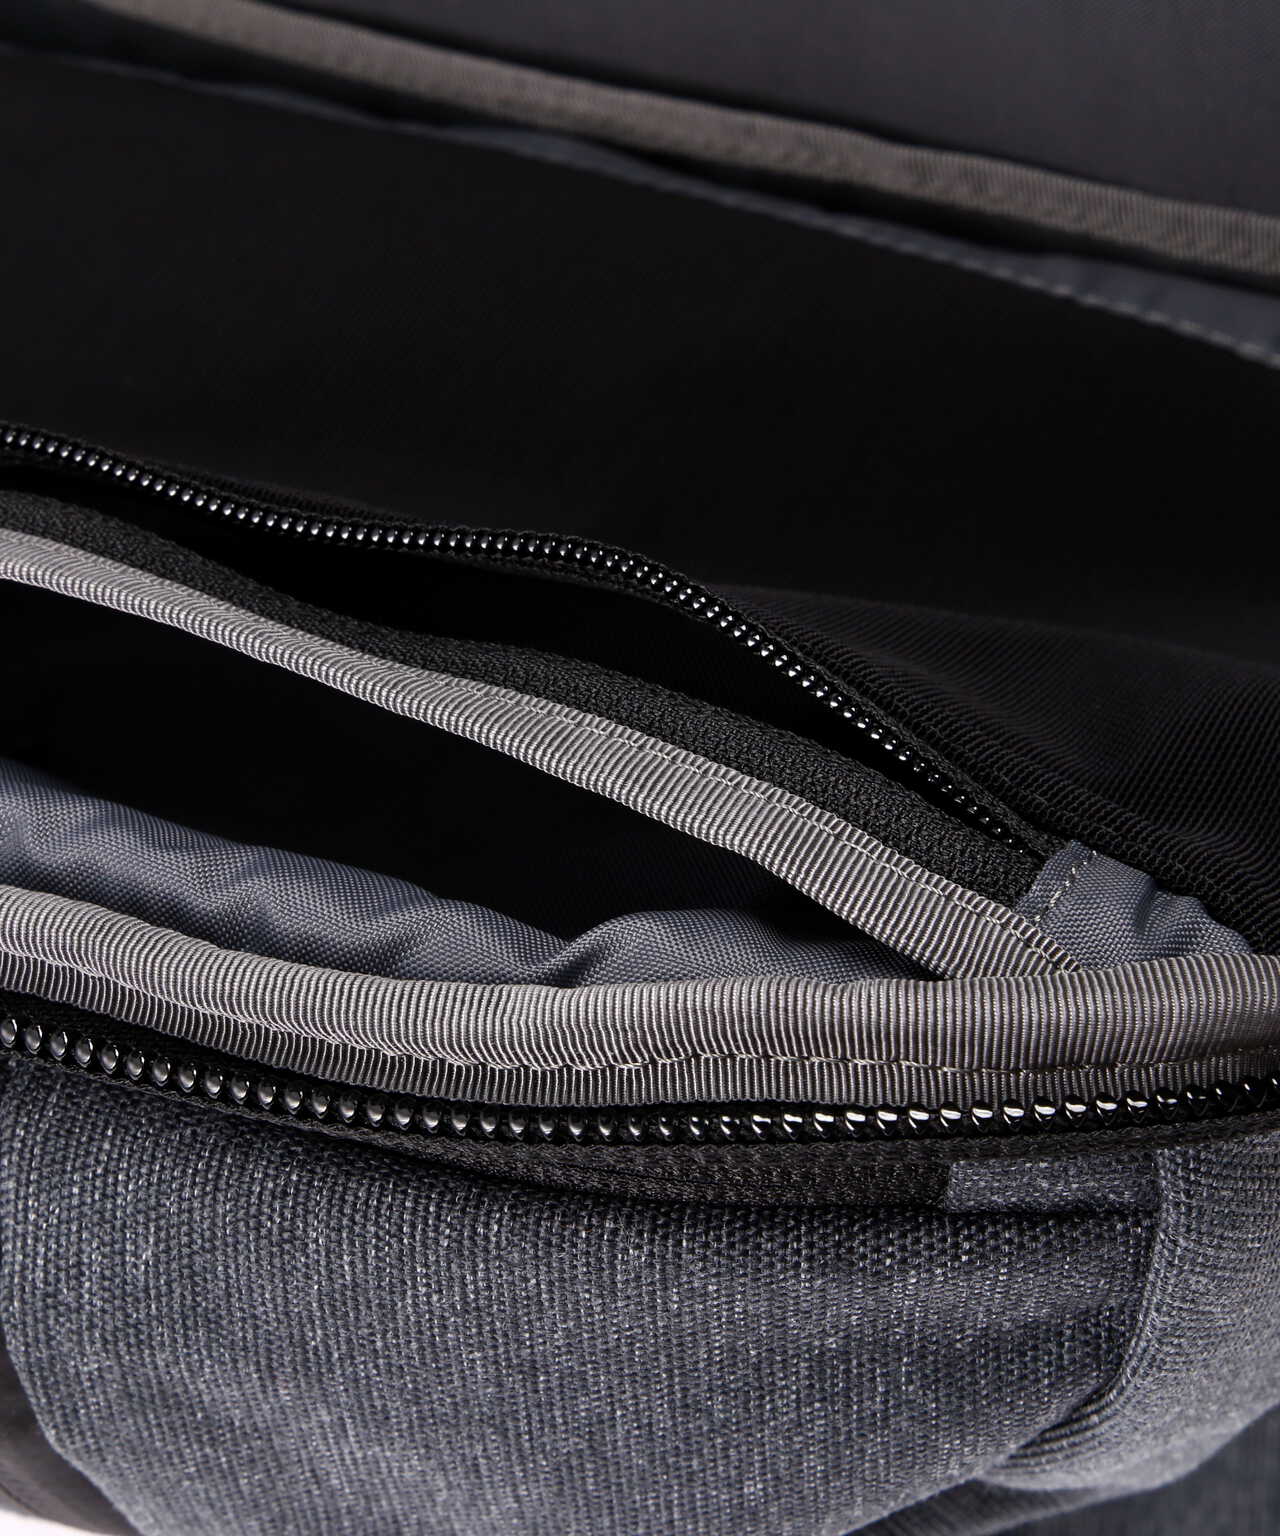 Aer（エアー）Fit Pack 3 Gray AER-12012